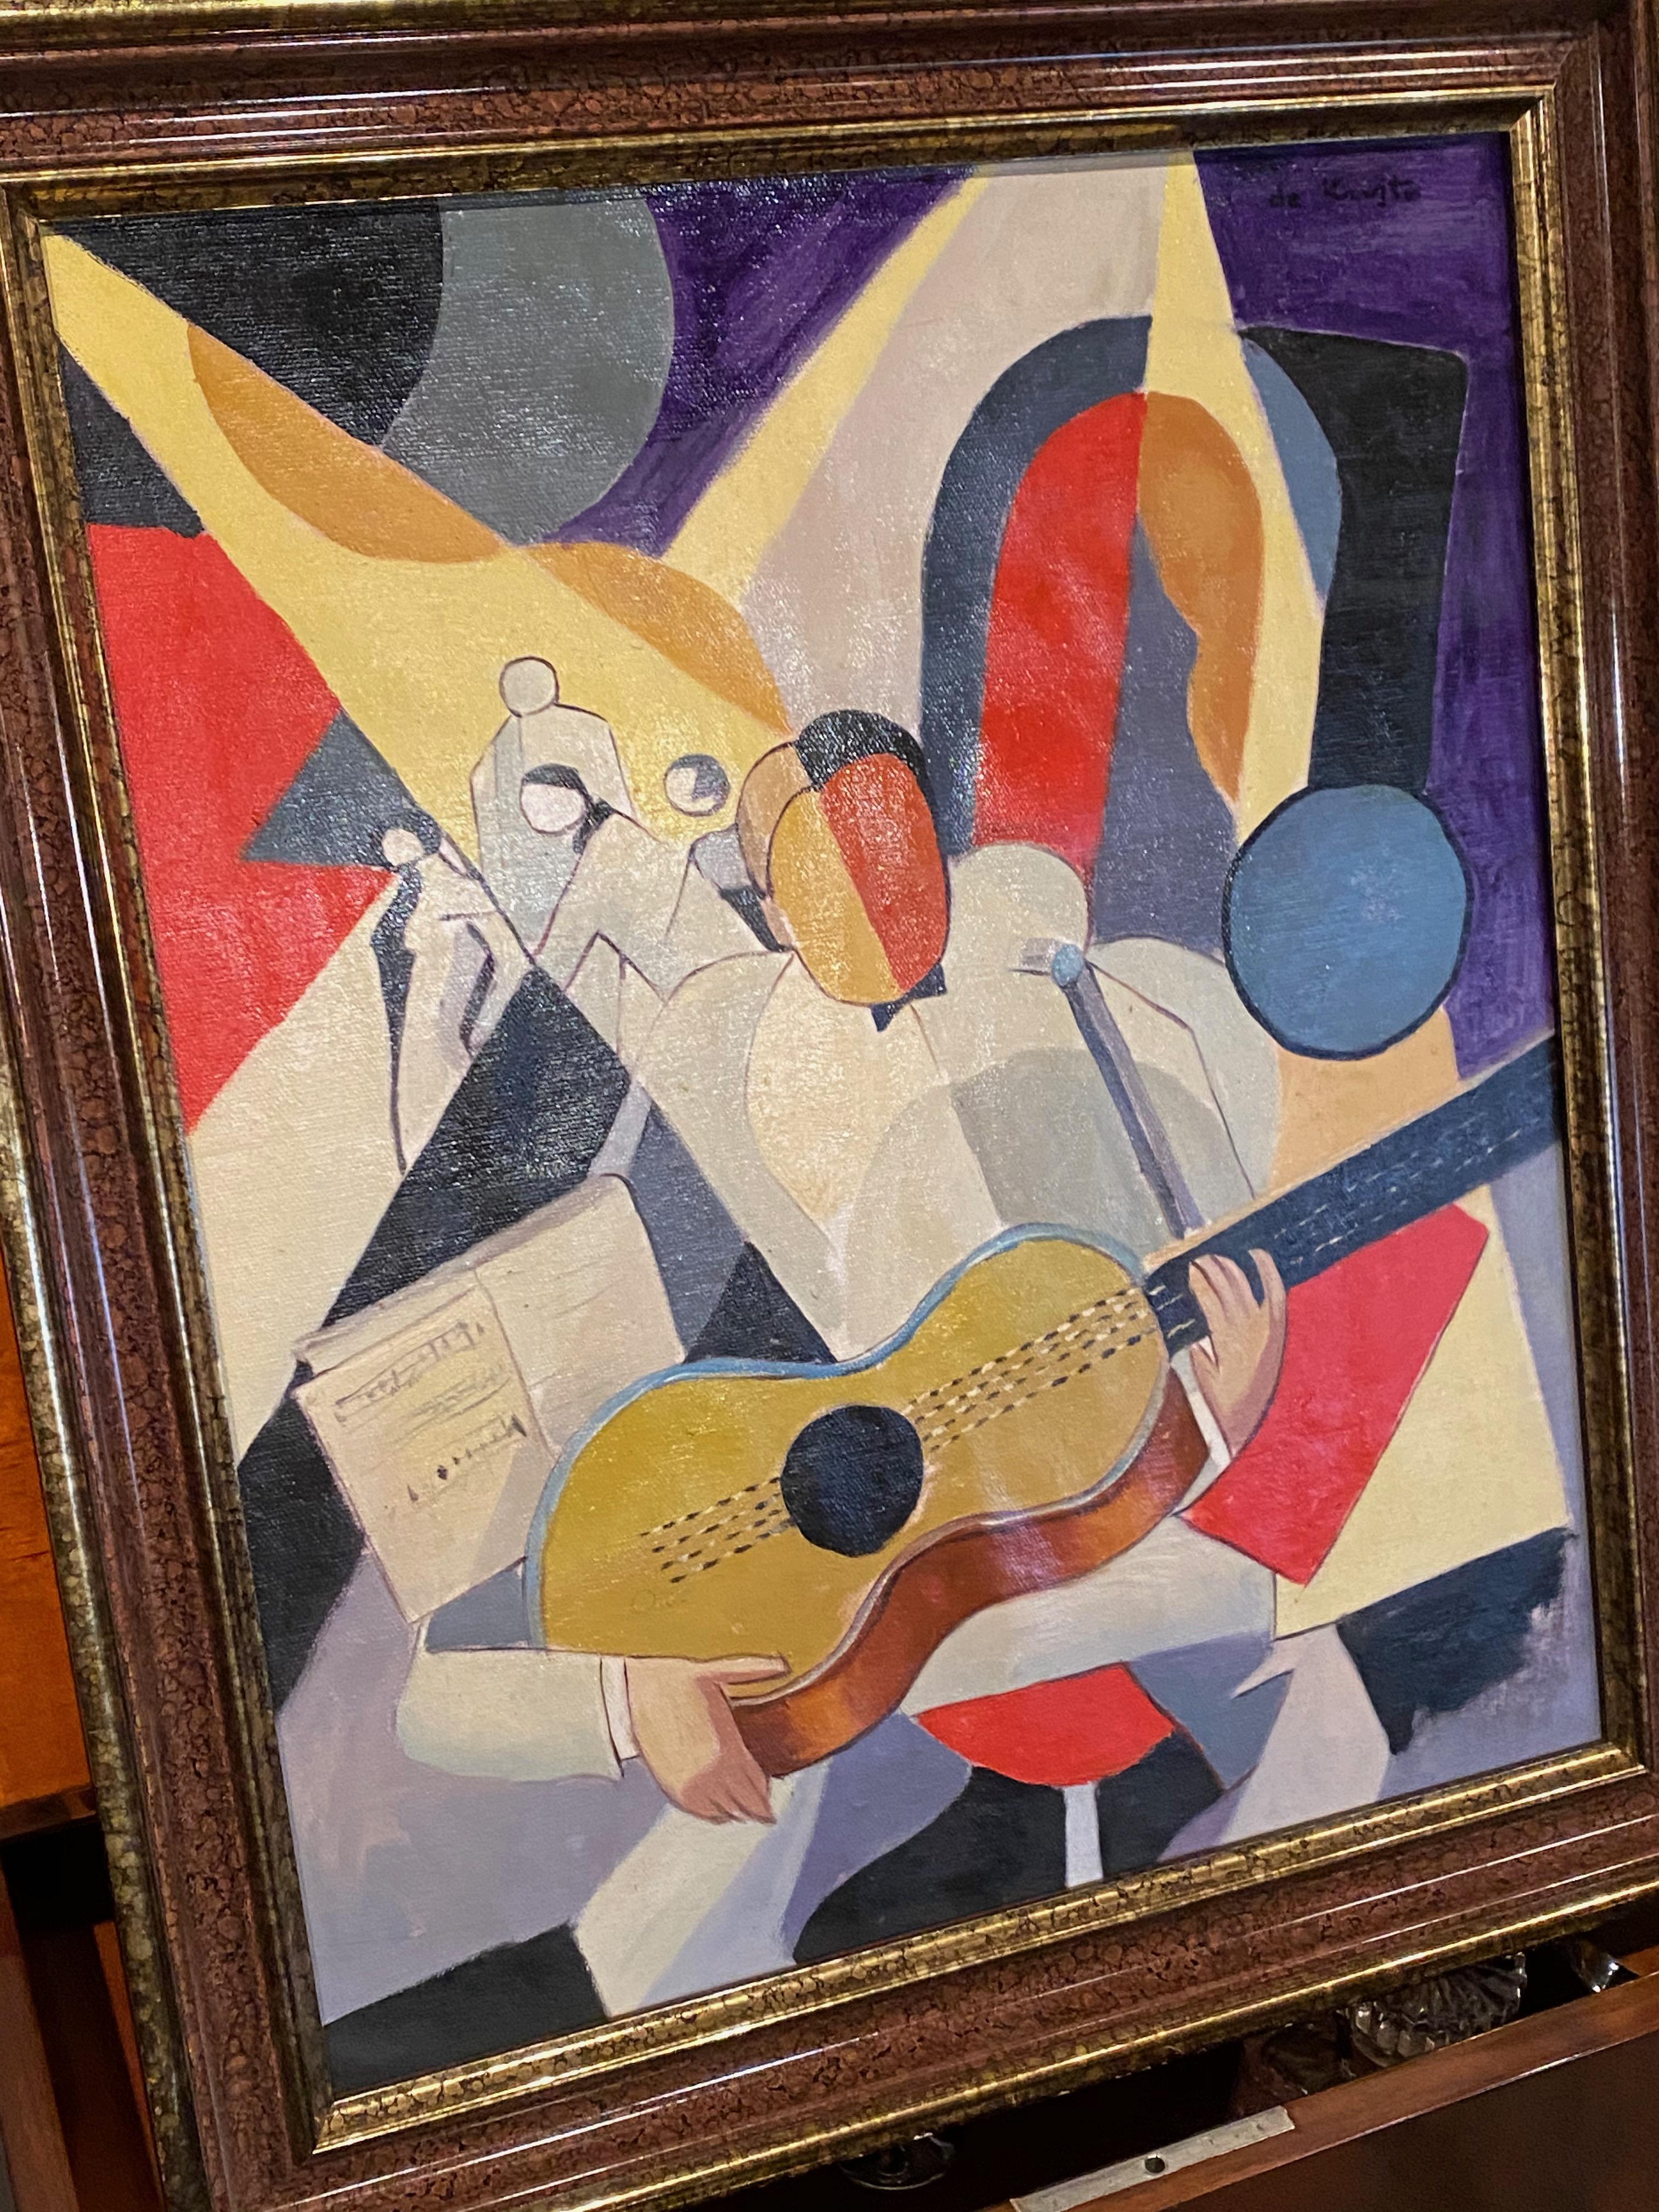 Art Deco cubist painting of guitar player by Bela De Kristo. Strong cubist style and colors, original and of the period. The image representing a solo guitarist with dancers in the background and sheet music adds to the overall feeling and artist